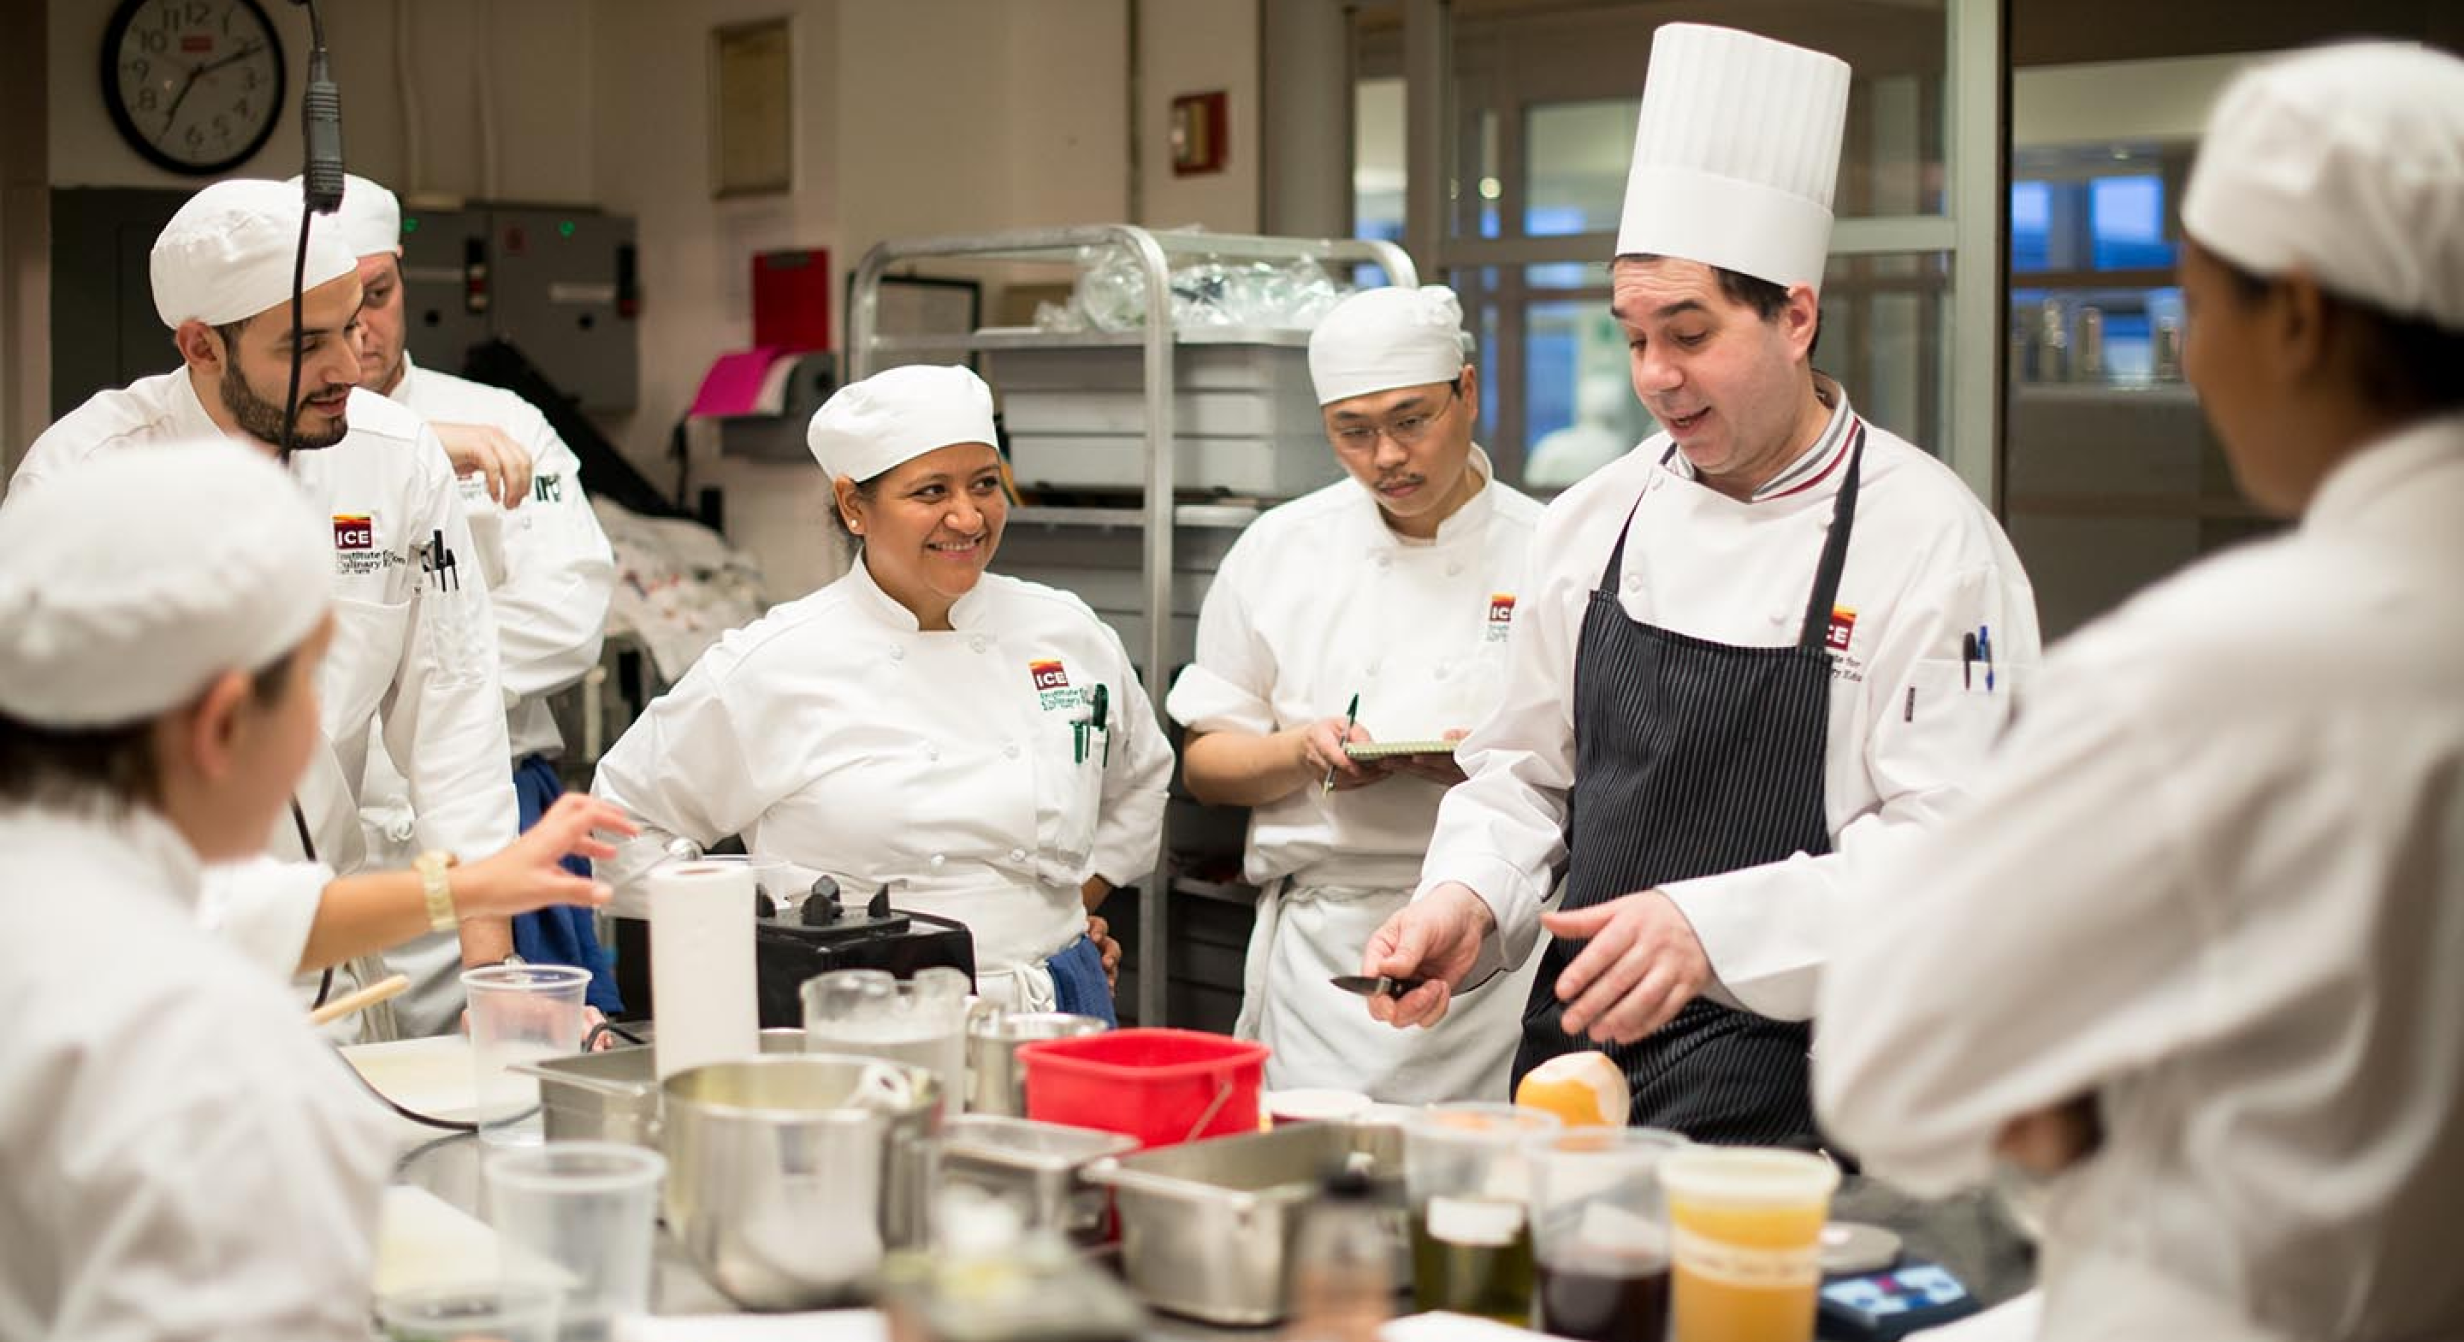 Image of culinary students in training. 